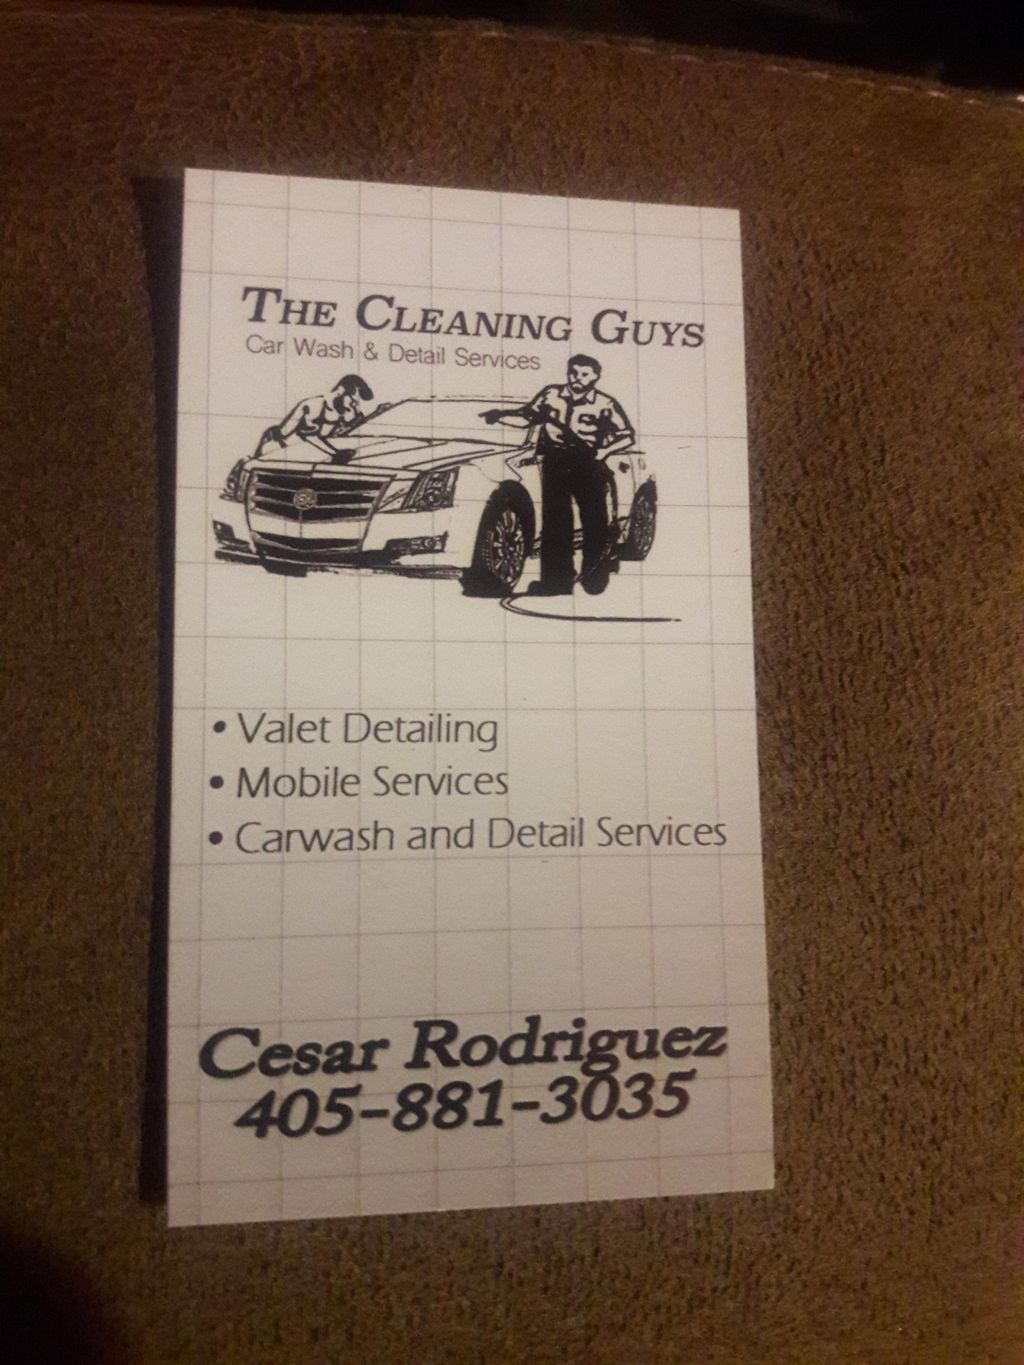 TCG DETAIL SERVICES